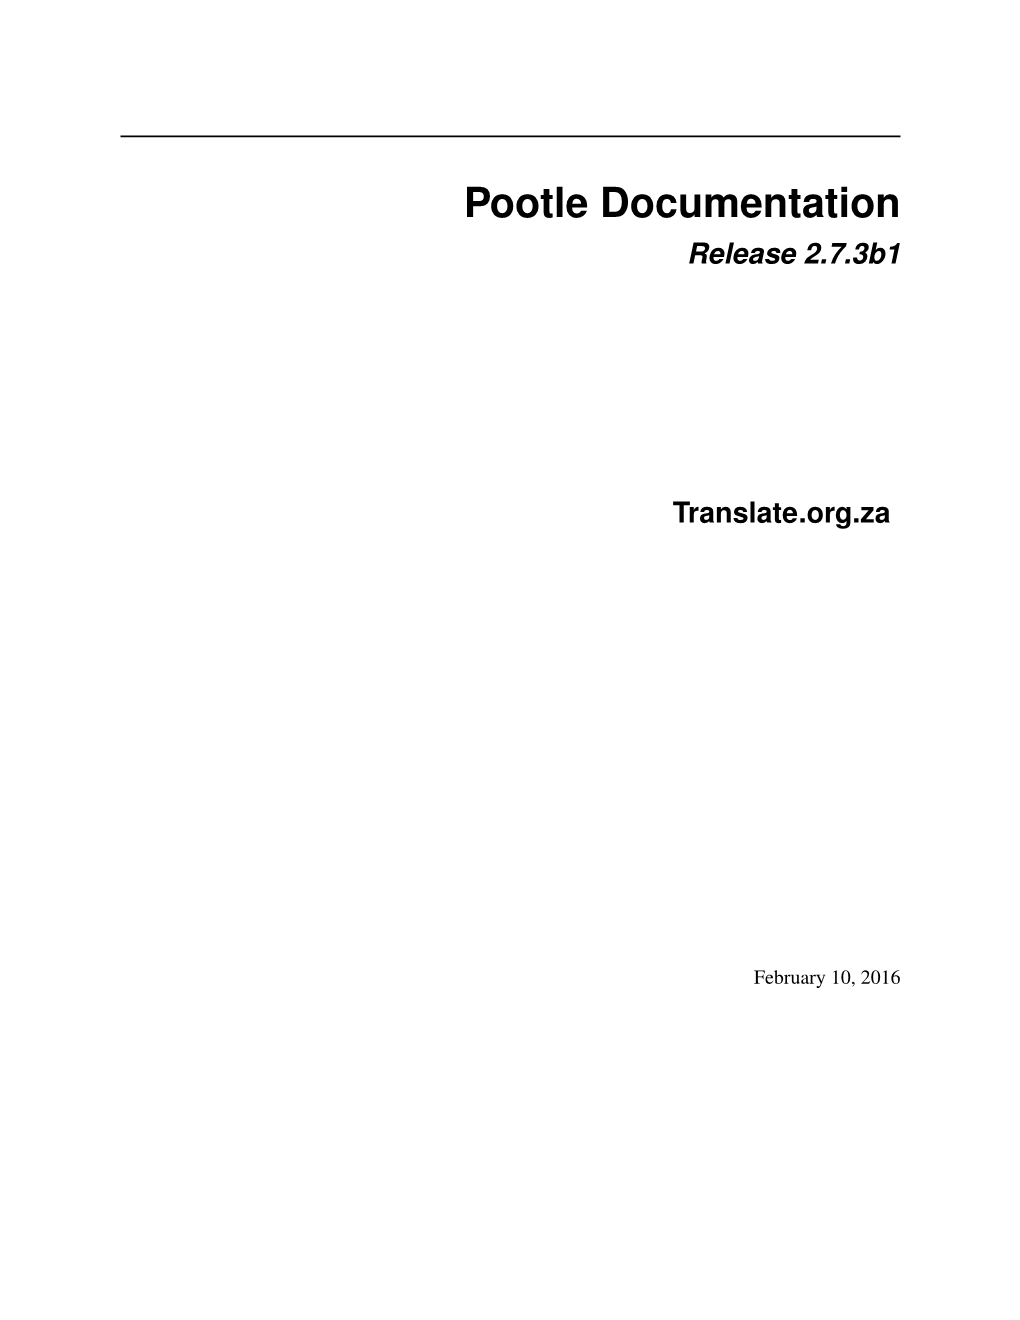 Pootle Documentation Release 2.7.3B1